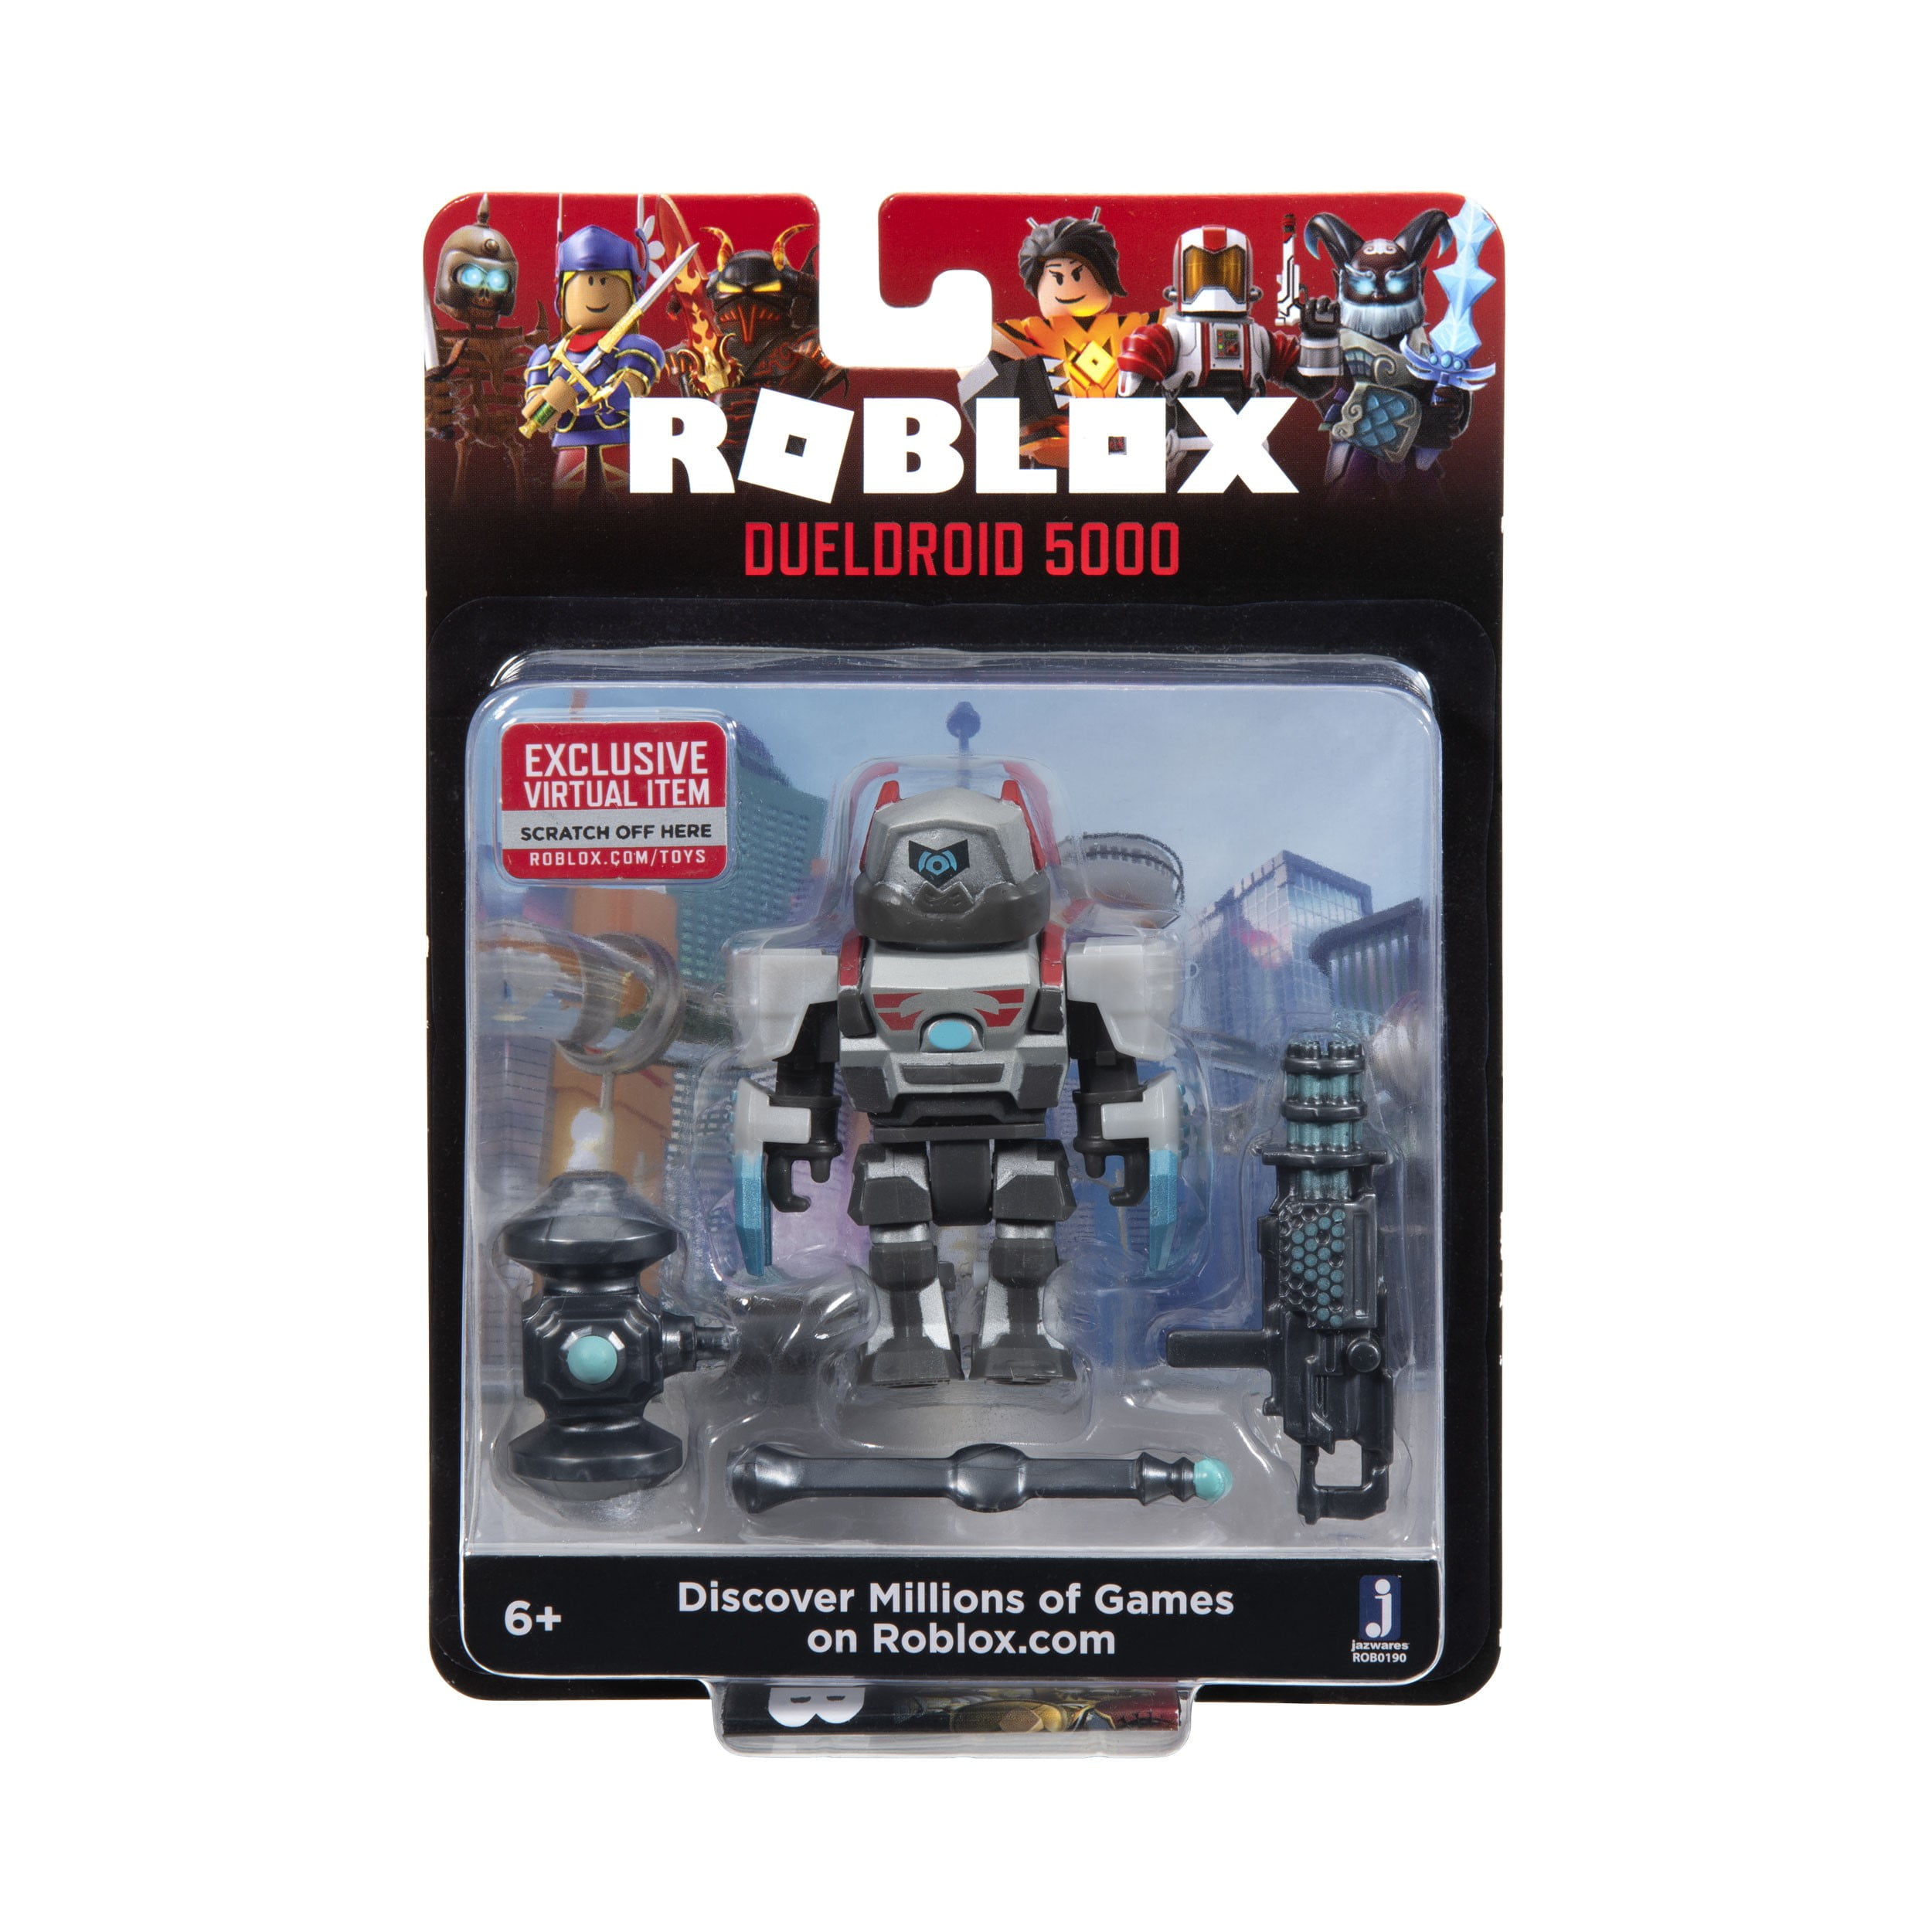 Roblox Action Collection Dueldroid 5000 Figure Pack Includes Exclusive Virtual Item Walmart Com Walmart Com - roblox dueldroid 5000 with virtual game code